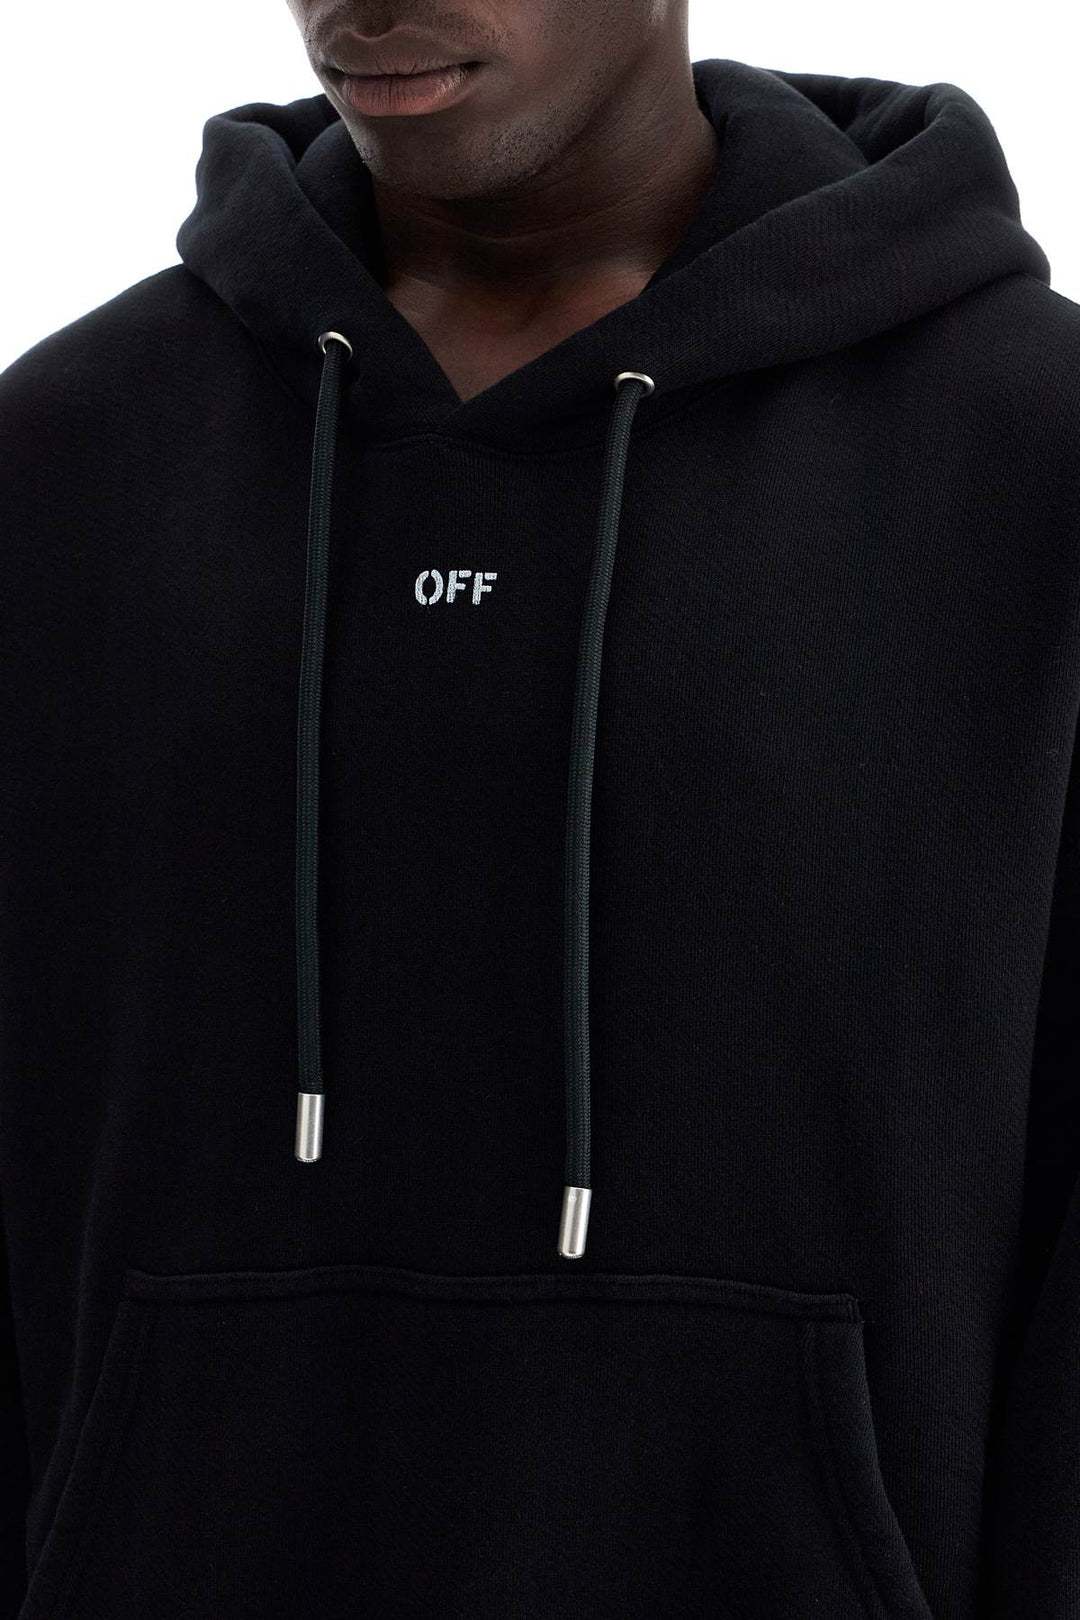 Off White Hooded Sweatshirt With Off Print   Black